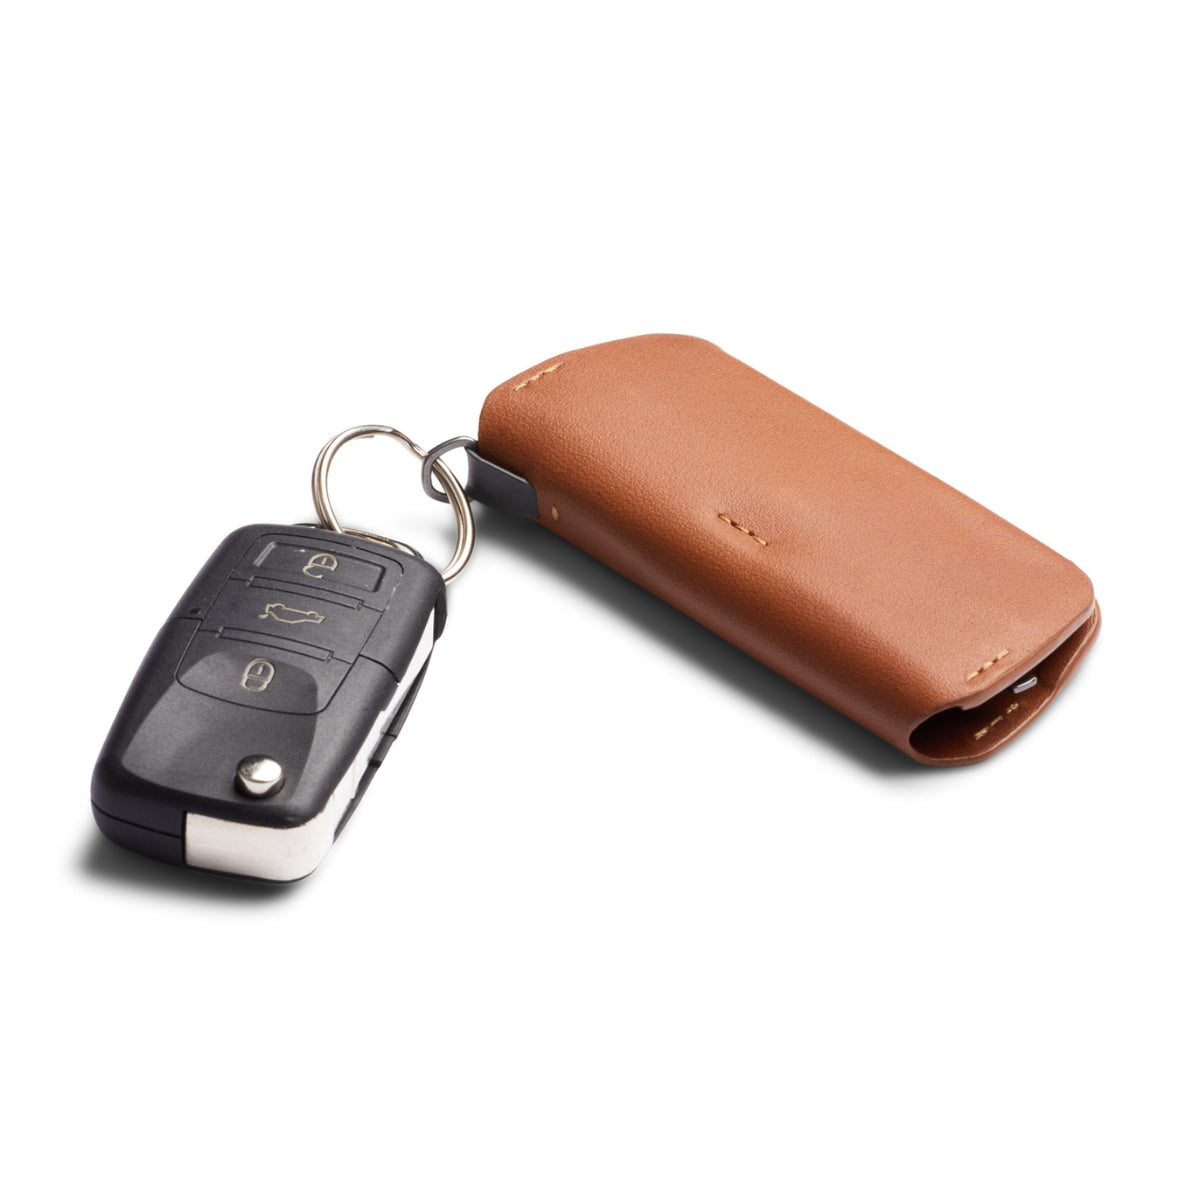 Bellroy Key Cover Plus (Third Edition) in Caramel